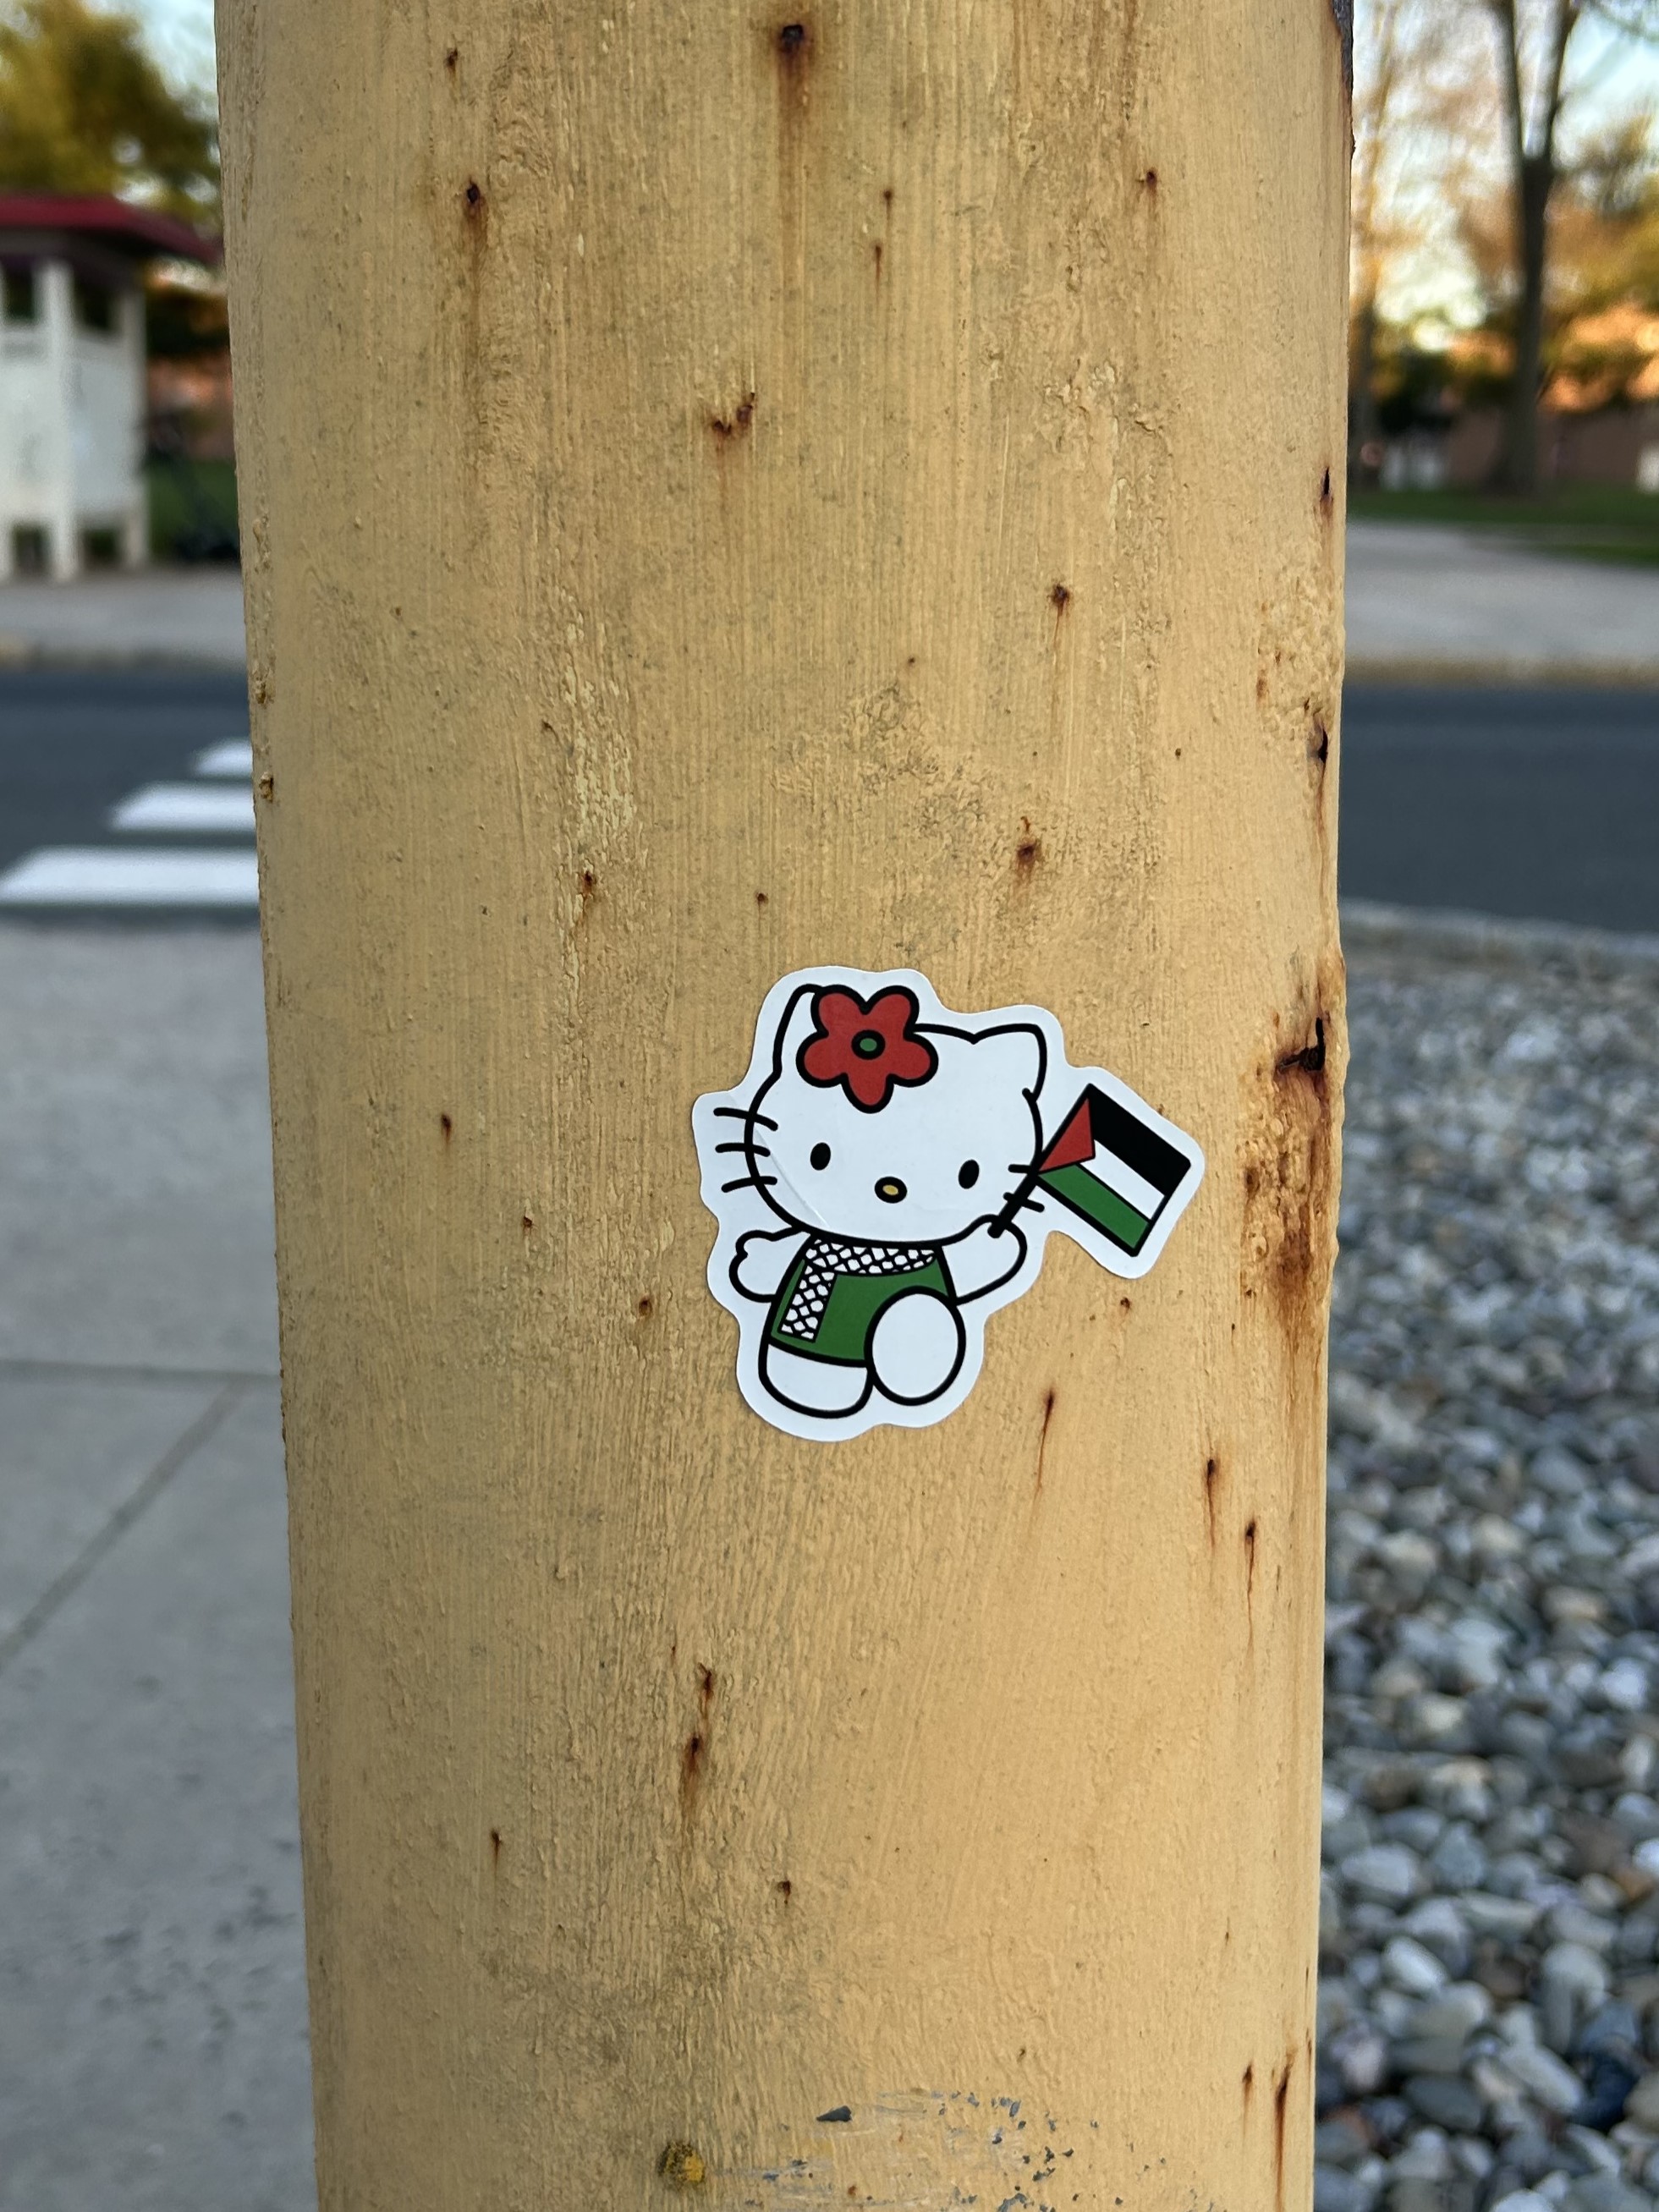 hello kitty with a palestinian flag sticker on a yellow pole